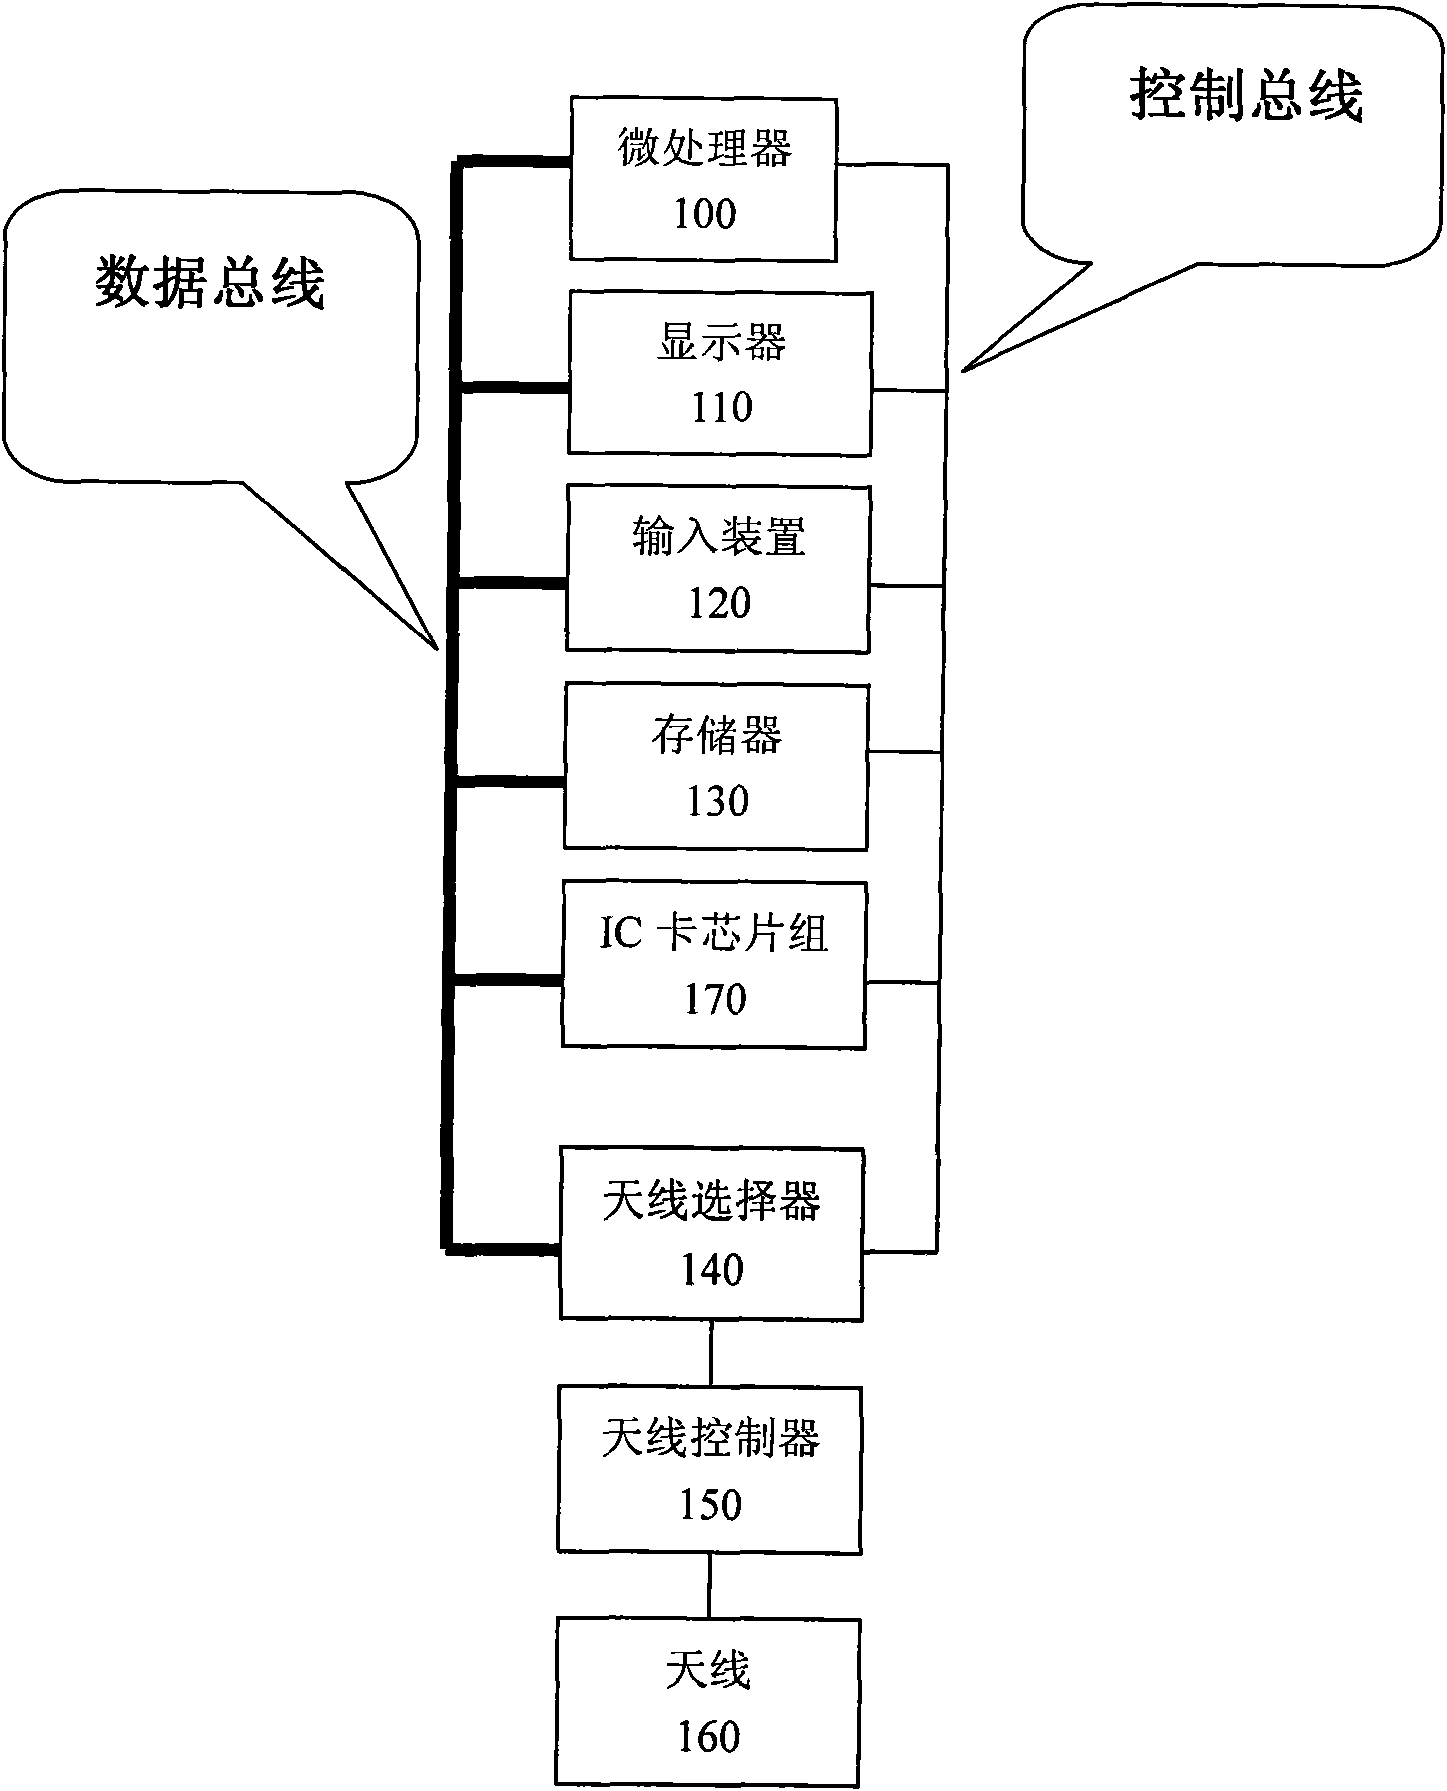 Electronic payment device for personal use